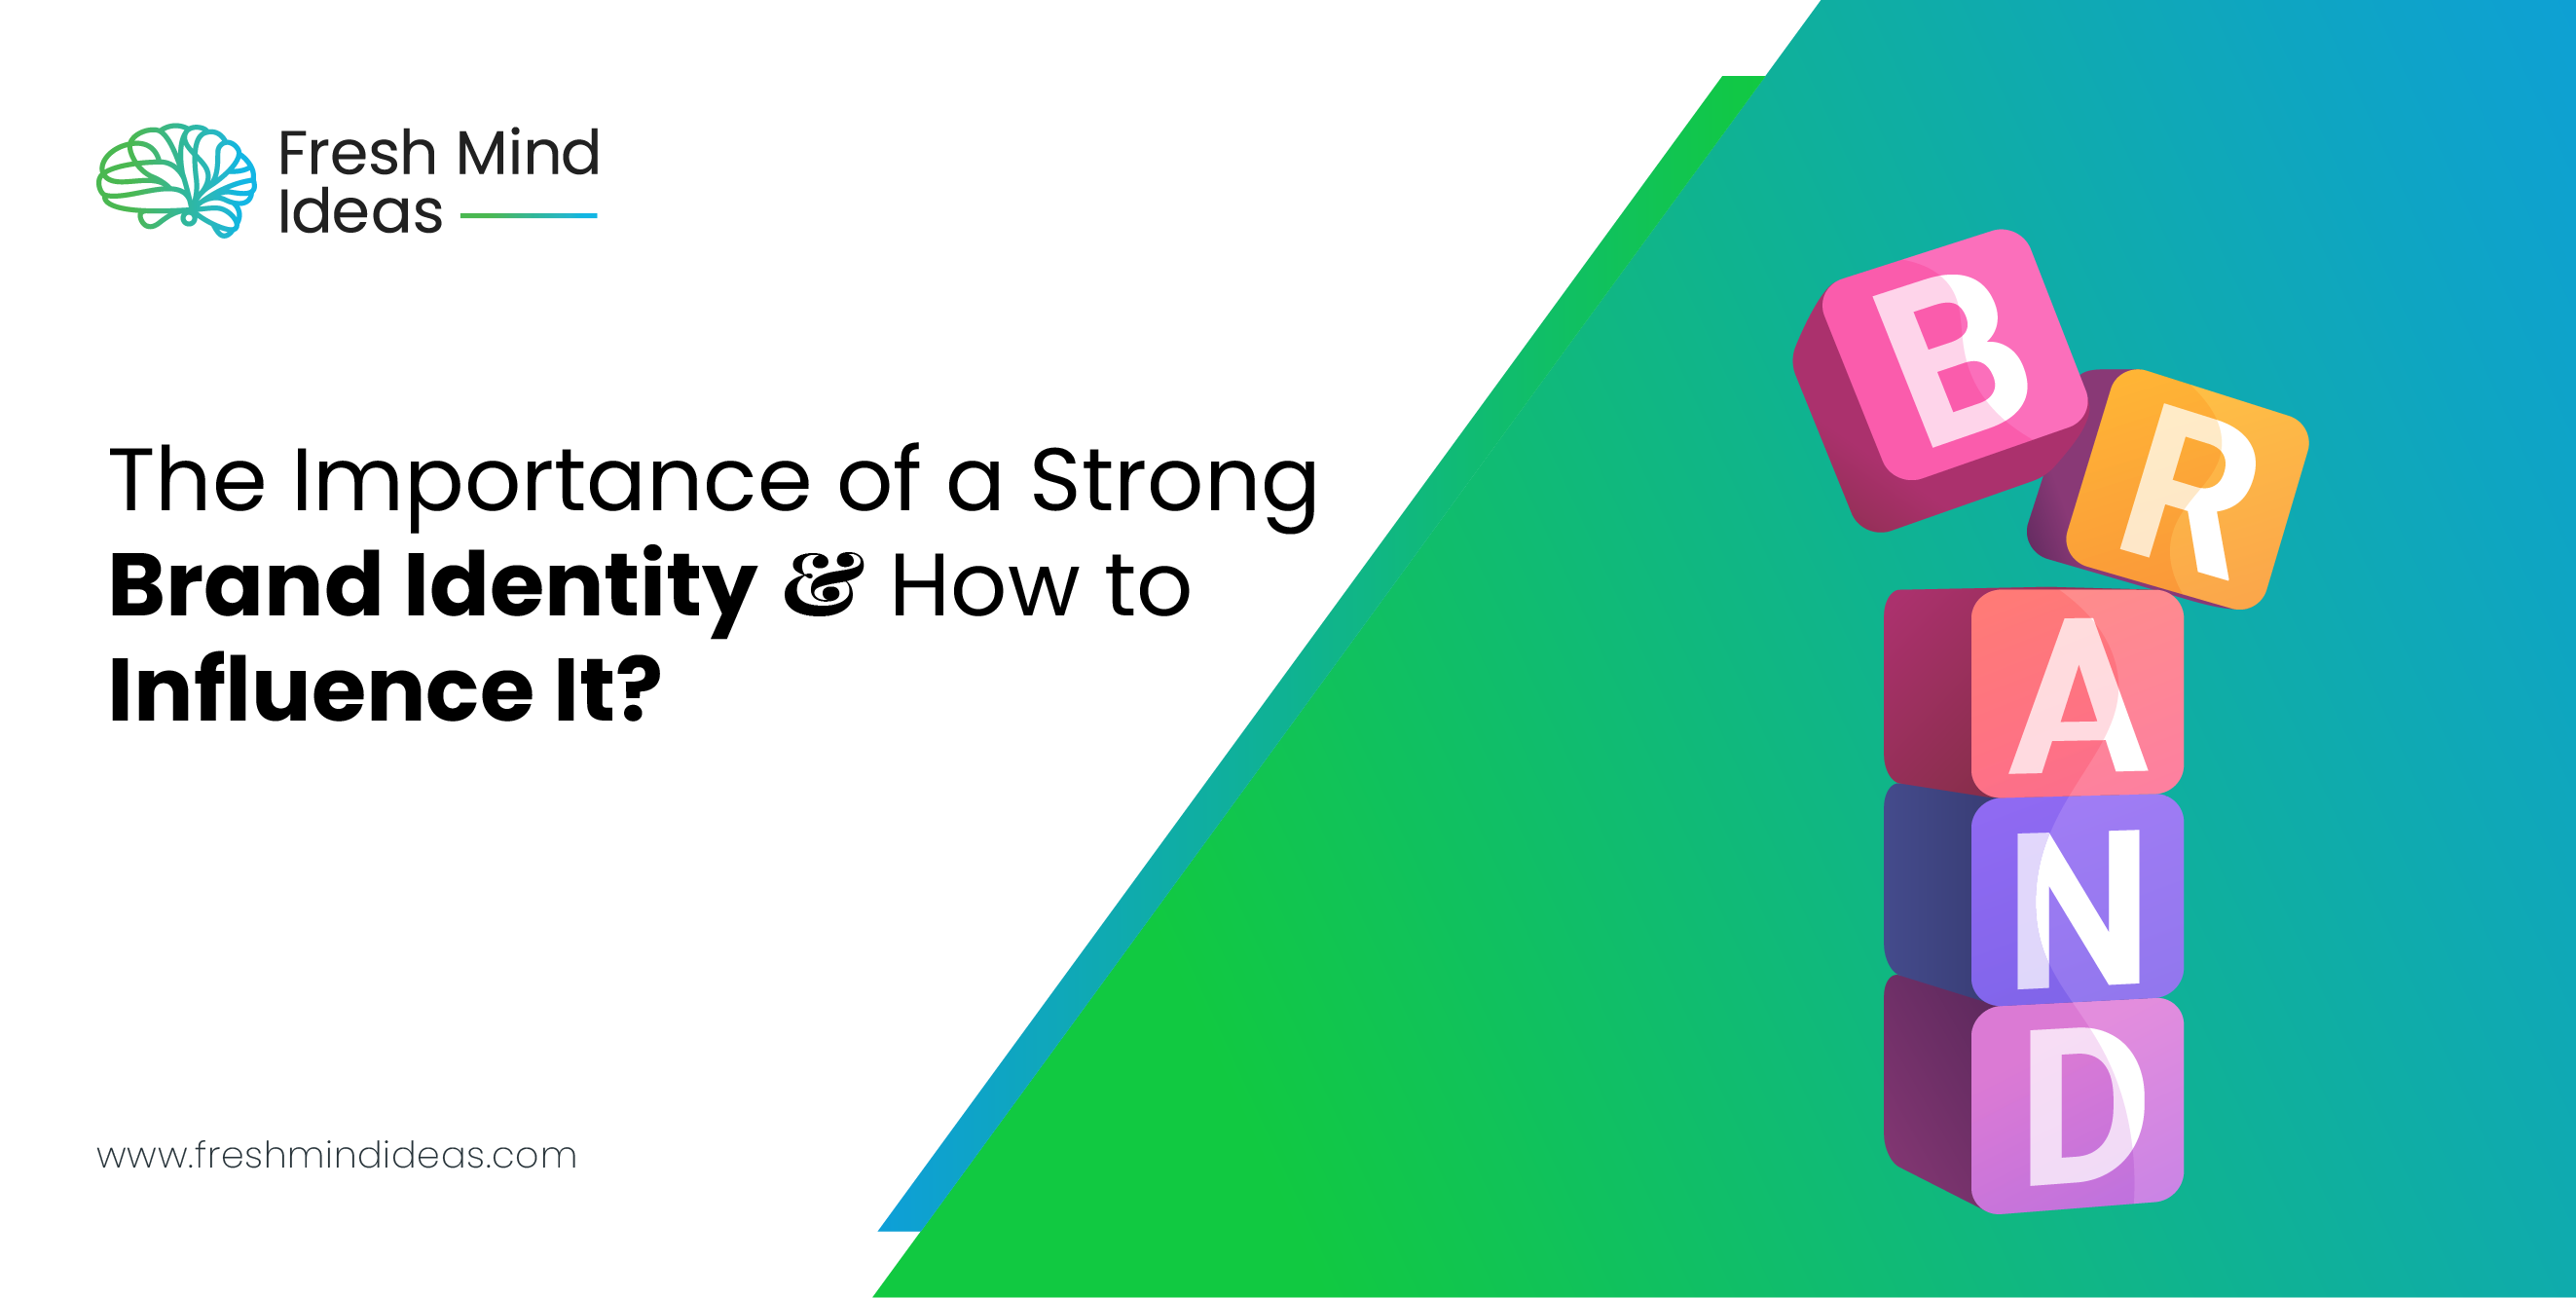 The Importance of a Strong Brand Identity & How to Influence It